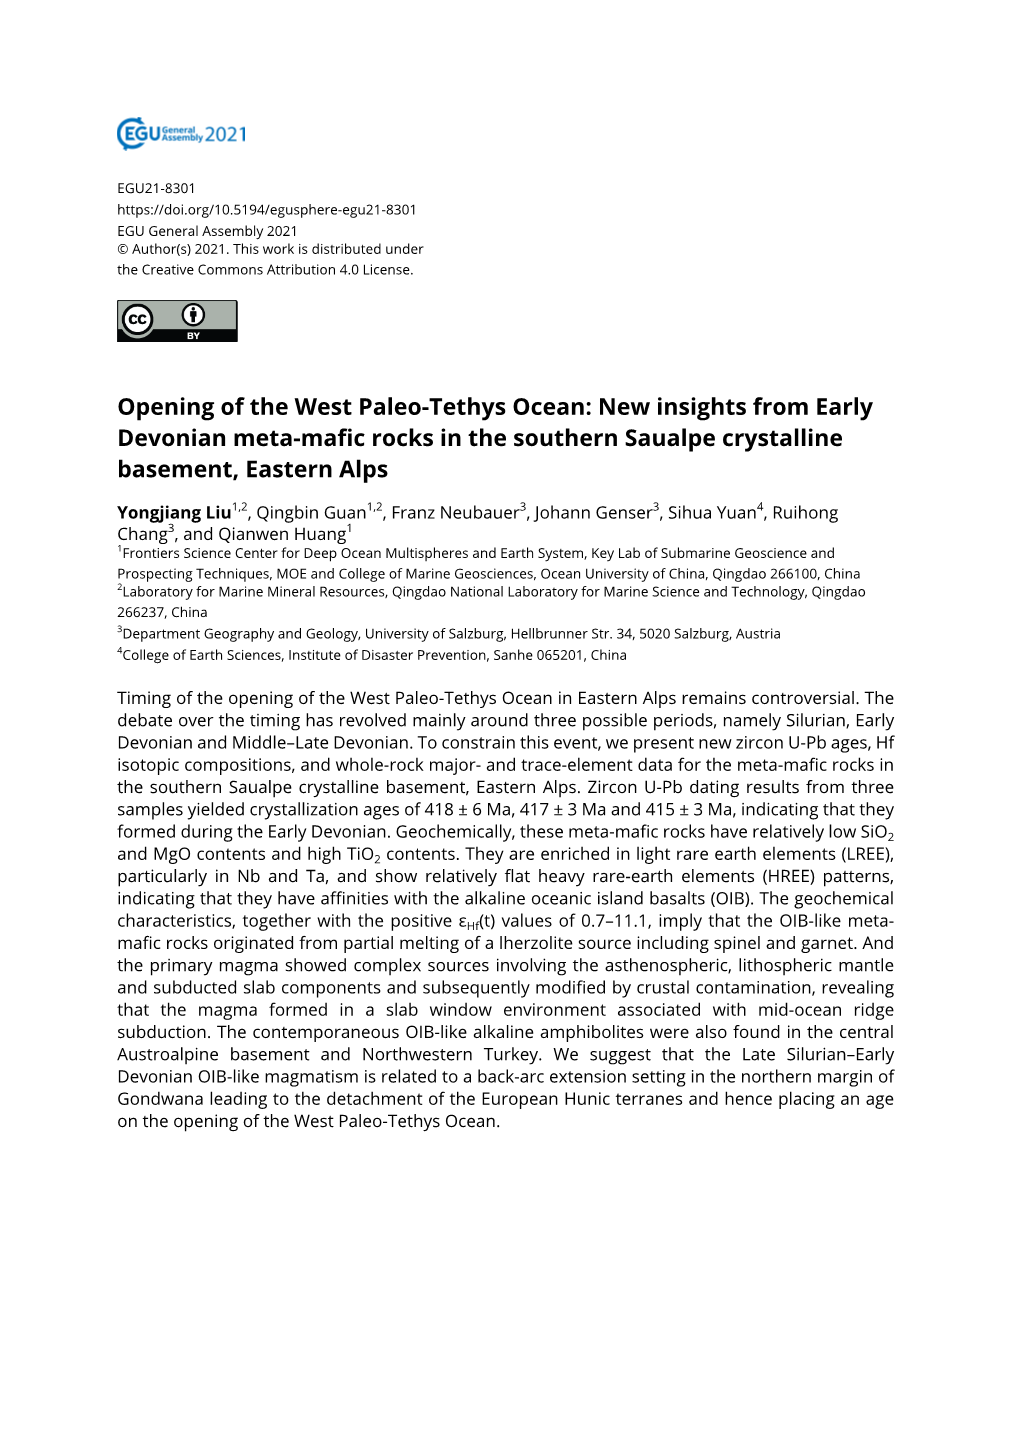 Opening of the West Paleo-Tethys Ocean: New Insights from Early Devonian Meta-Mafic Rocks in the Southern Saualpe Crystalline Basement, Eastern Alps